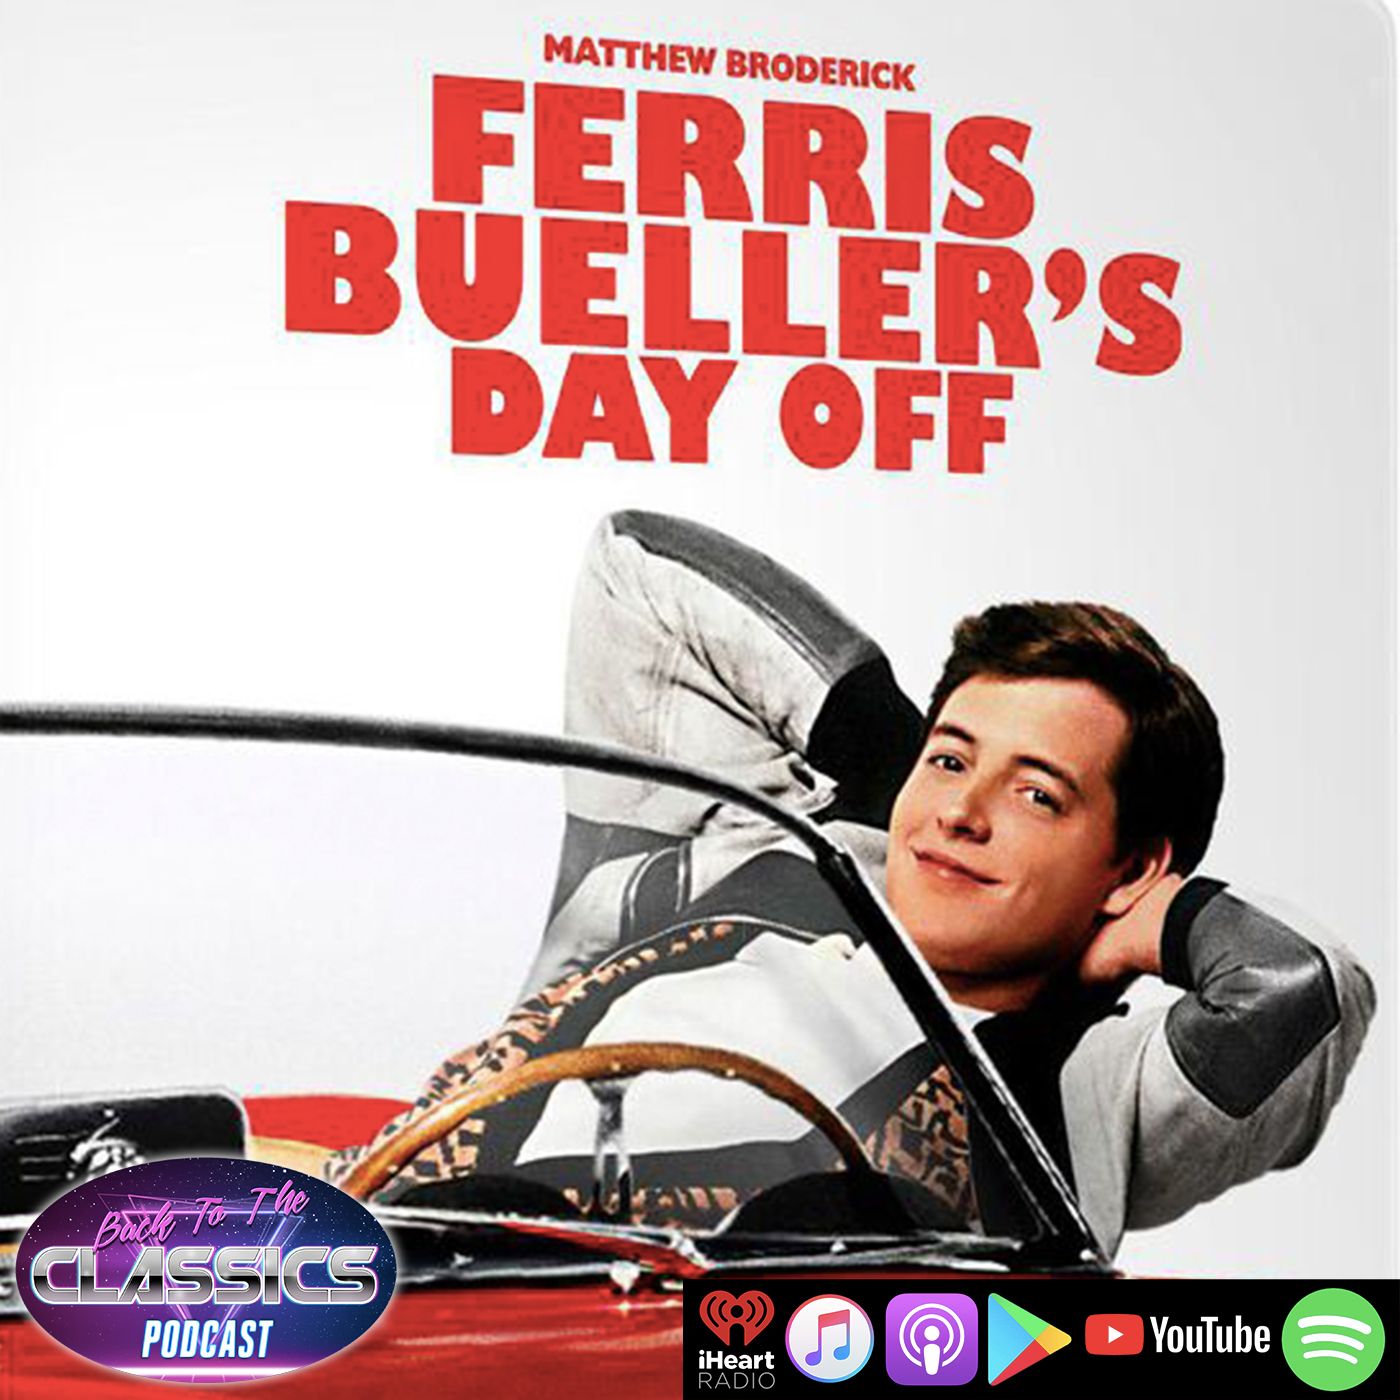 Back to Ferris Bueller’s Day Off